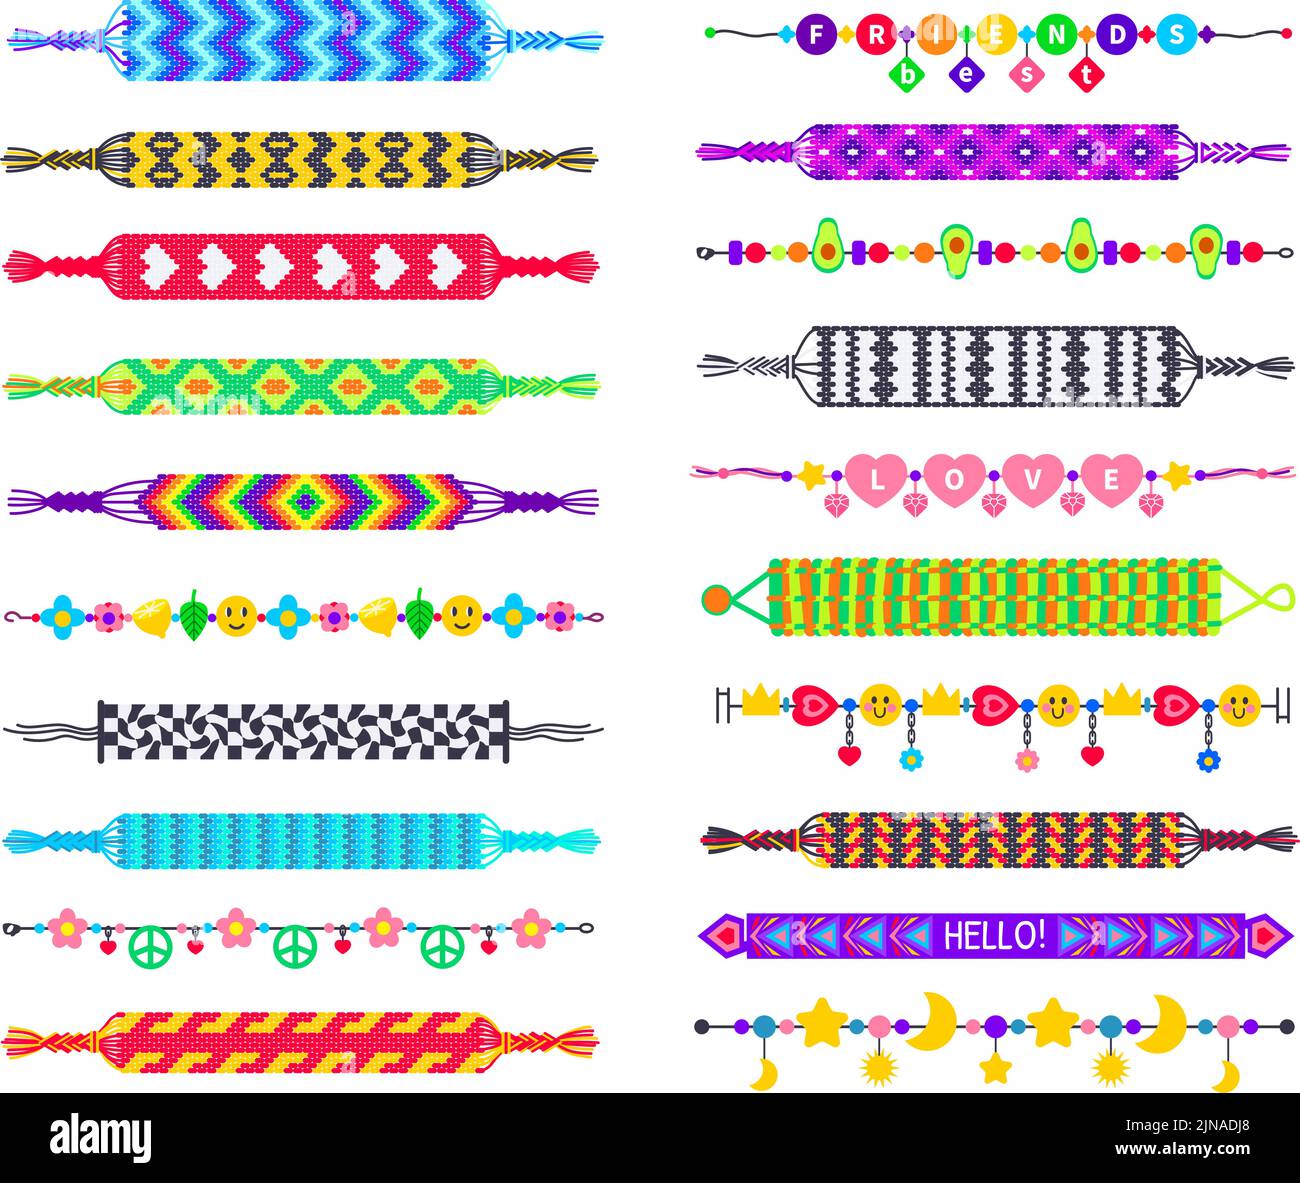 Handmade hippie bracelets. Friendship bands, colorful wristband and braided bracelet vector set Stock Vector